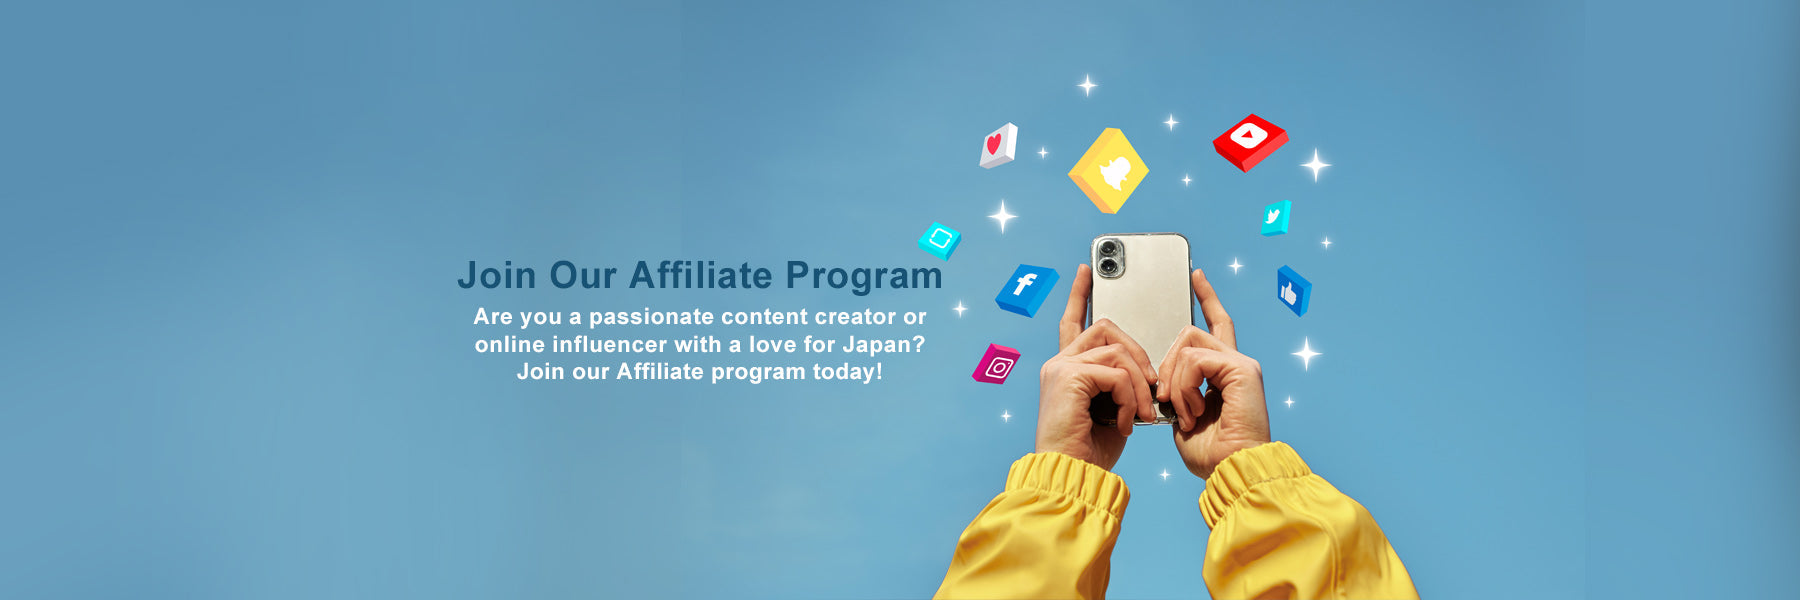 Why become an affiliate?